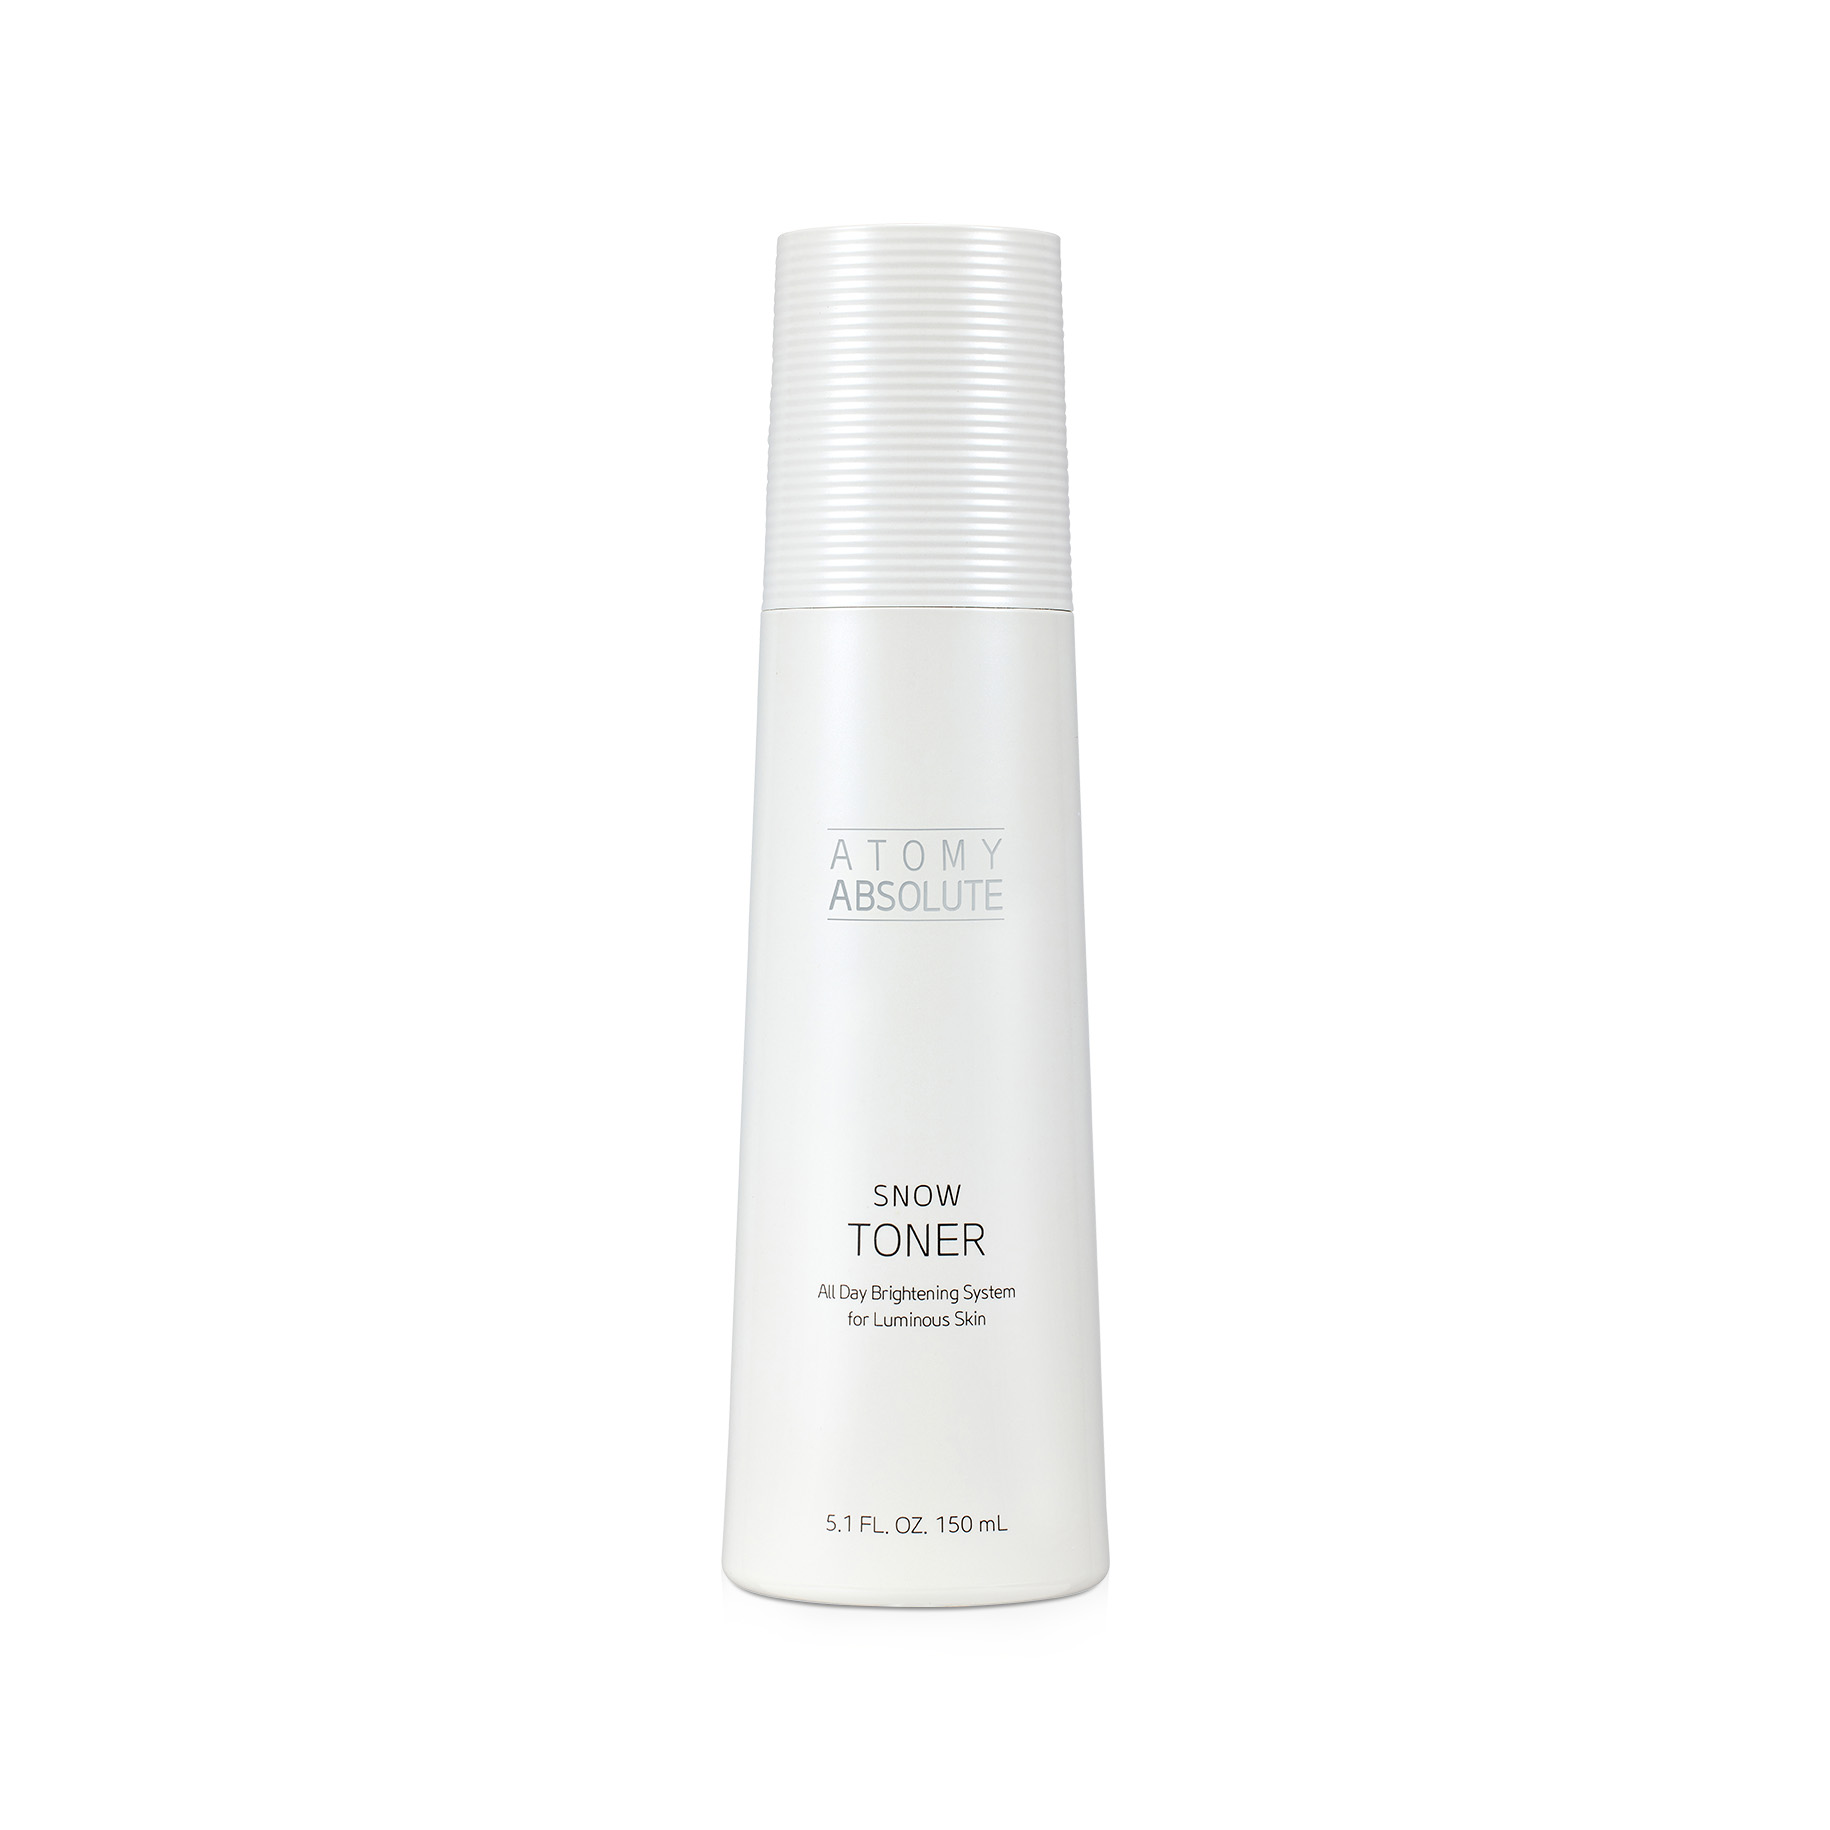 Atomy Absolute Snow Toner | Atomy Colombia